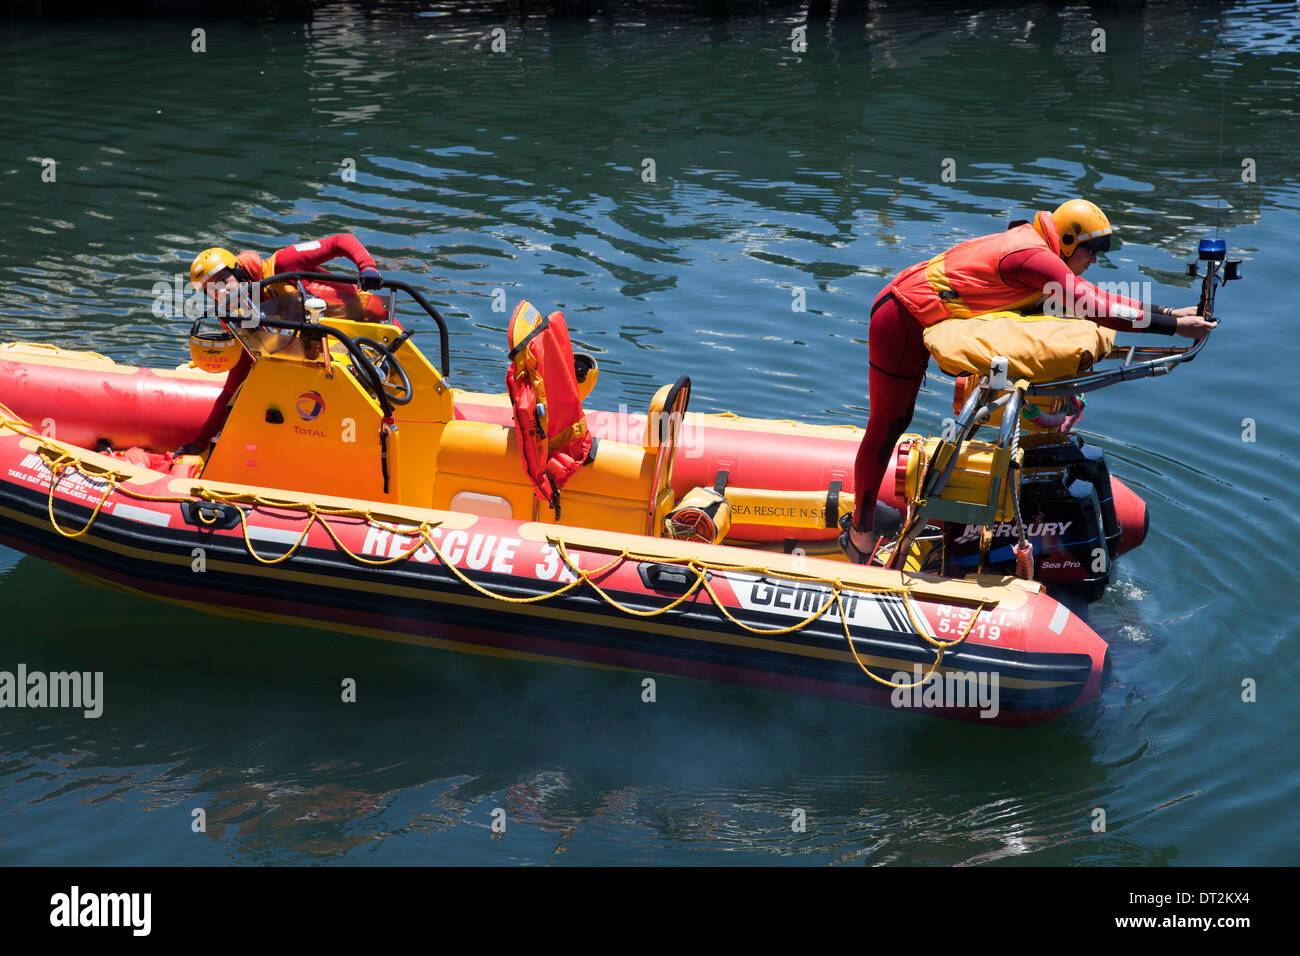 National Sea Rescue Institute Boat with Volunteers on Table Bay in Cape Town - South Africa Stock Photo